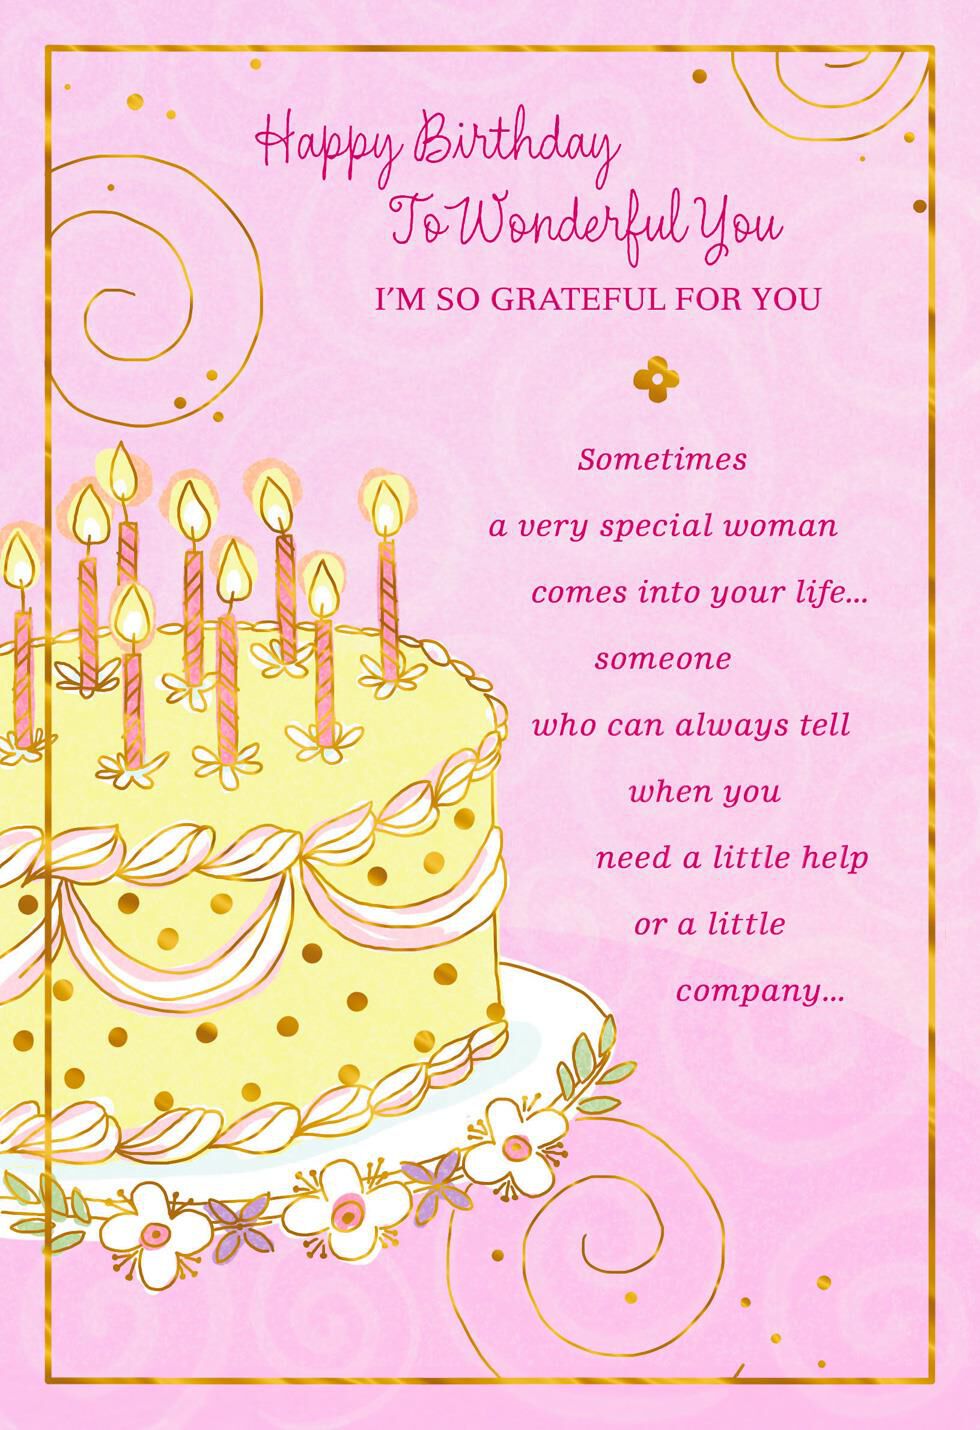 Yellow Cake and Candles Birthday Card - Greeting Cards - Hallmark